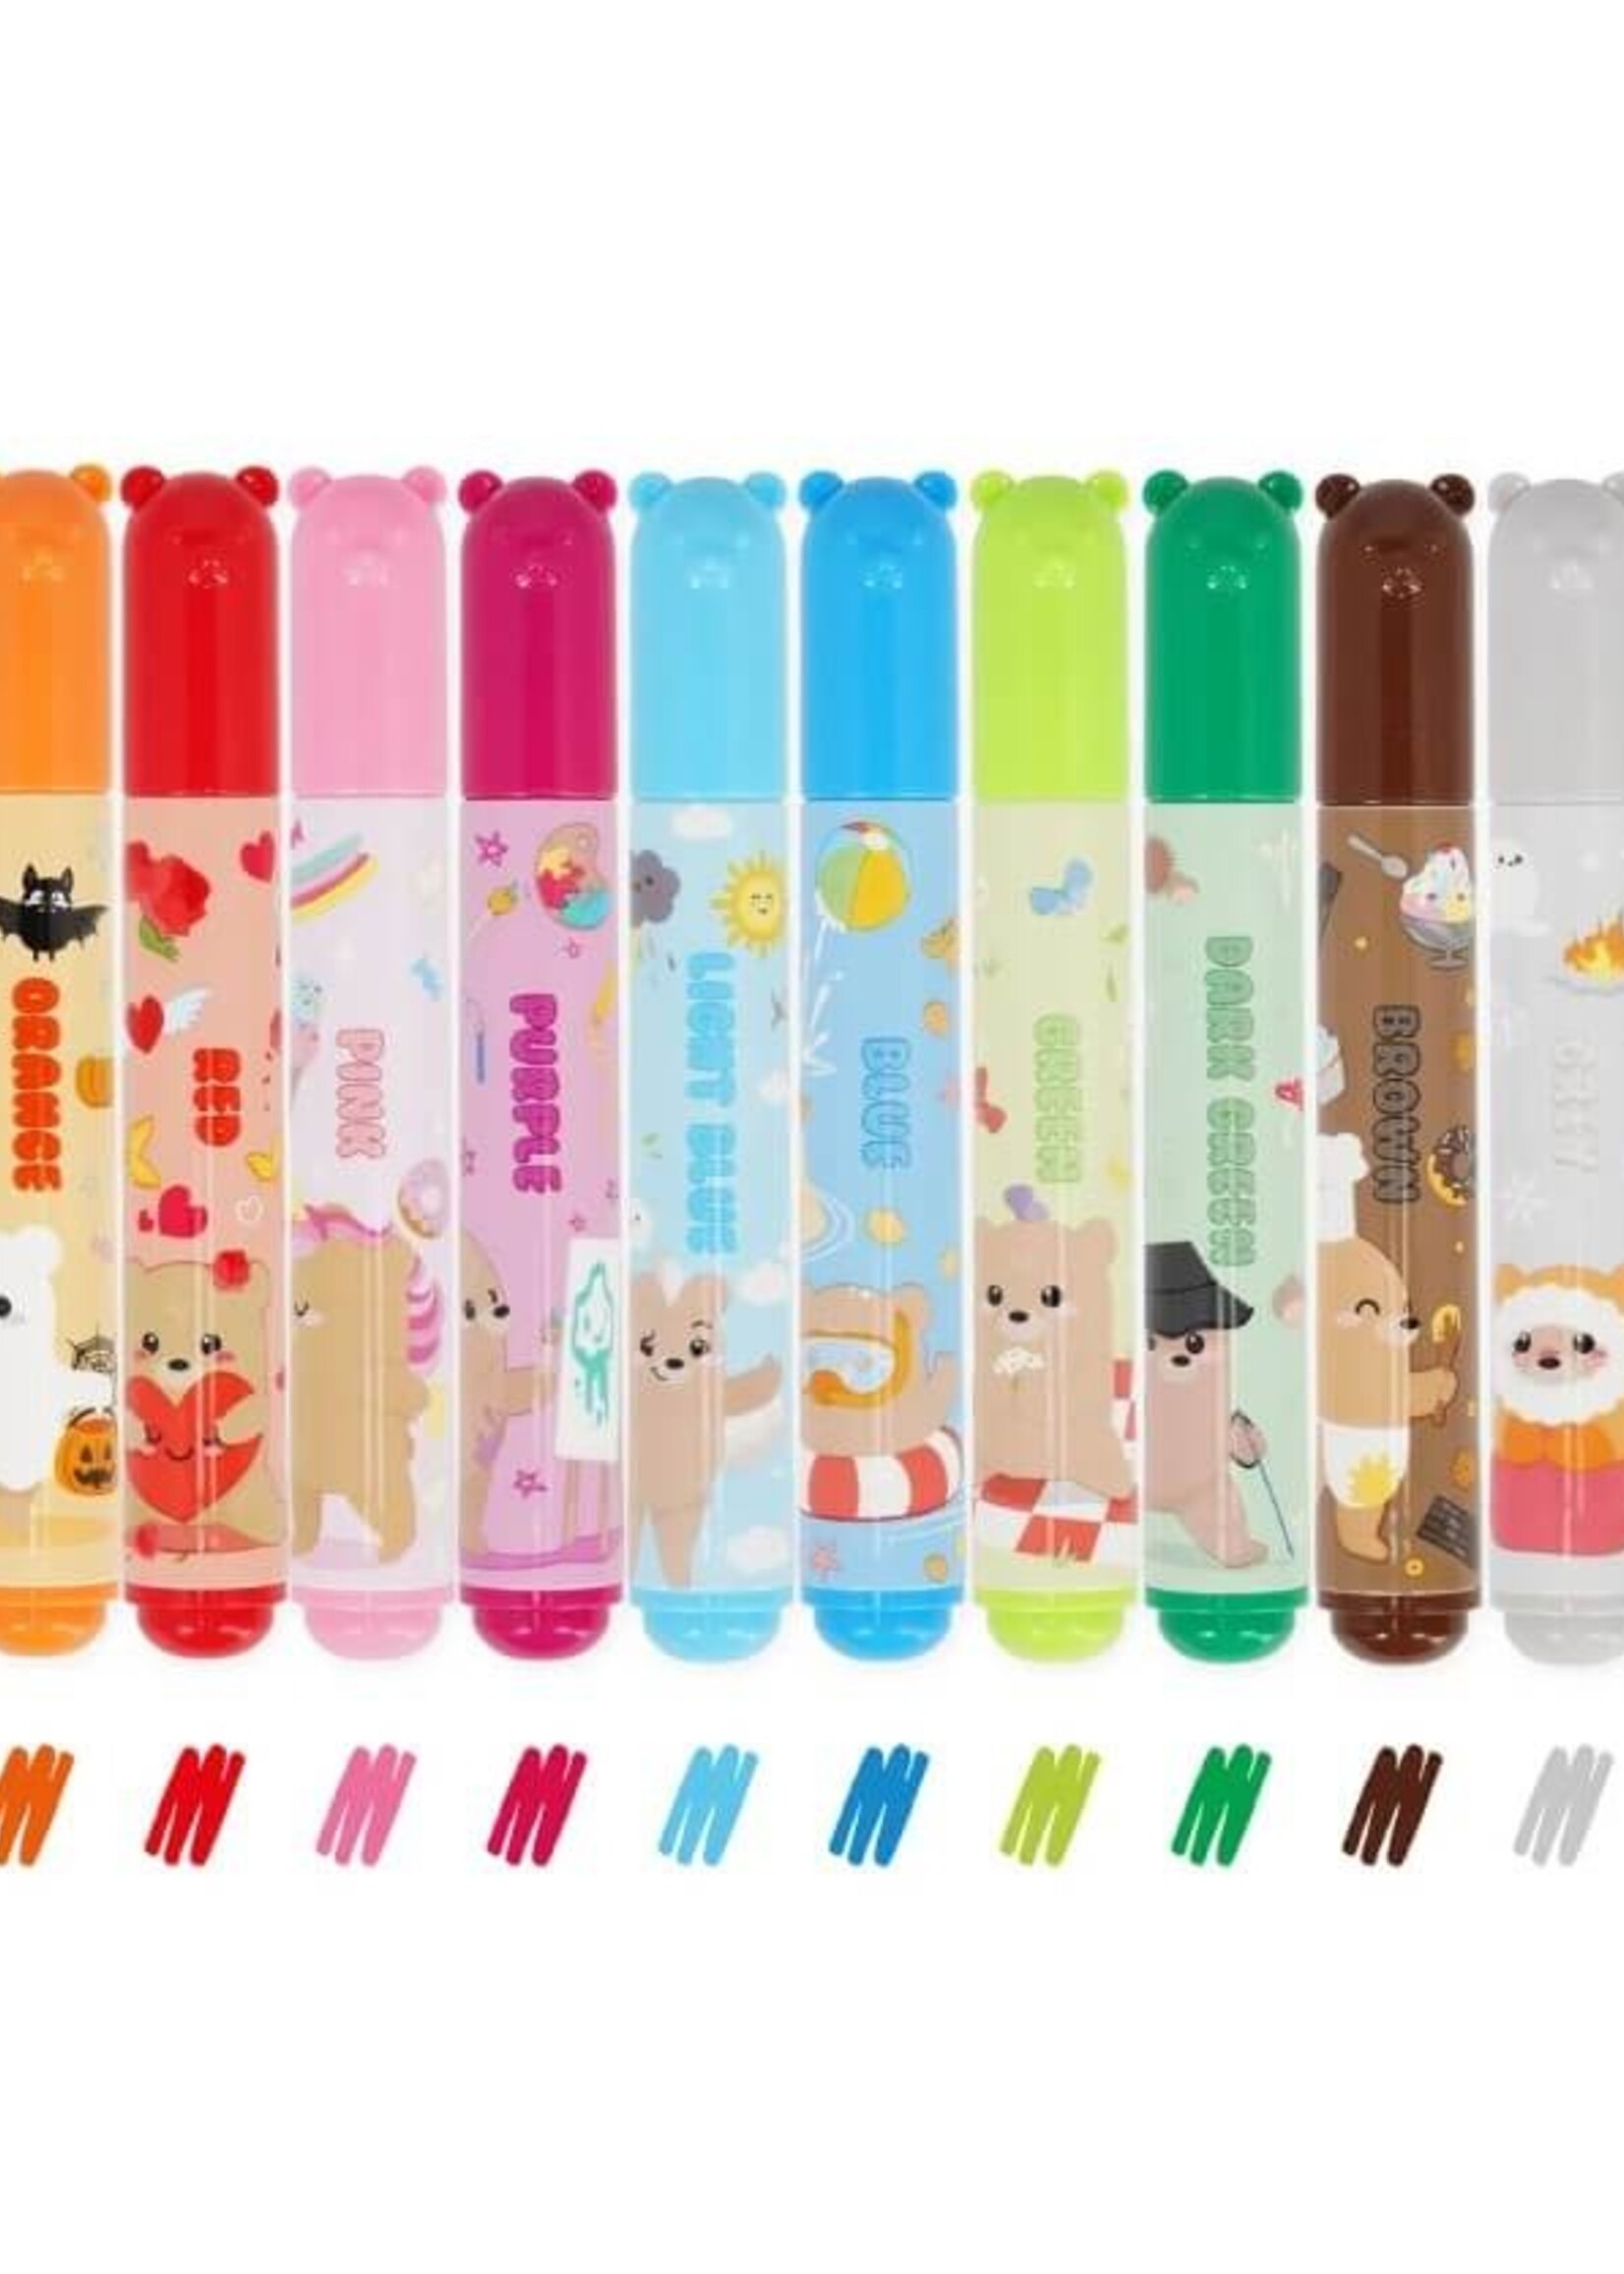 LEGAMI SET OF 12 MARKERS - TEDDY